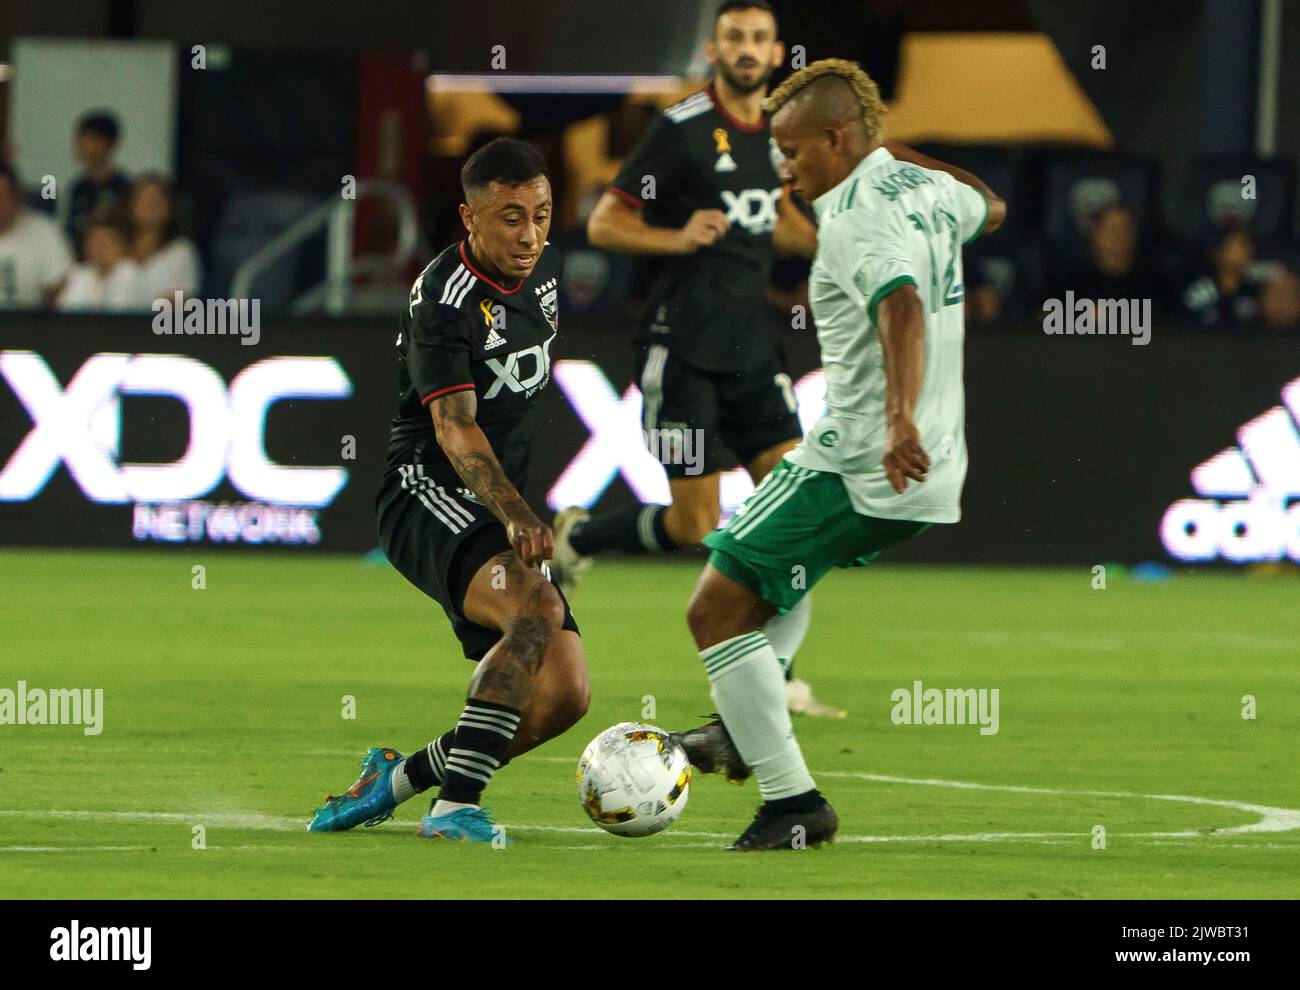 WASHINGTON, DC, USA - 4 SEPTEMBER 2022: D.C. United forward Martin Rodriguez (77) and Colorado Rapids forward Michael Barrios (12) challenge for the ball during a MLS match between D.C United and the Colorado Rapids, on September 04, 2022, at Audi Field, in Washington, DC. (Photo by Tony Quinn-Alamy Live News) Stock Photo